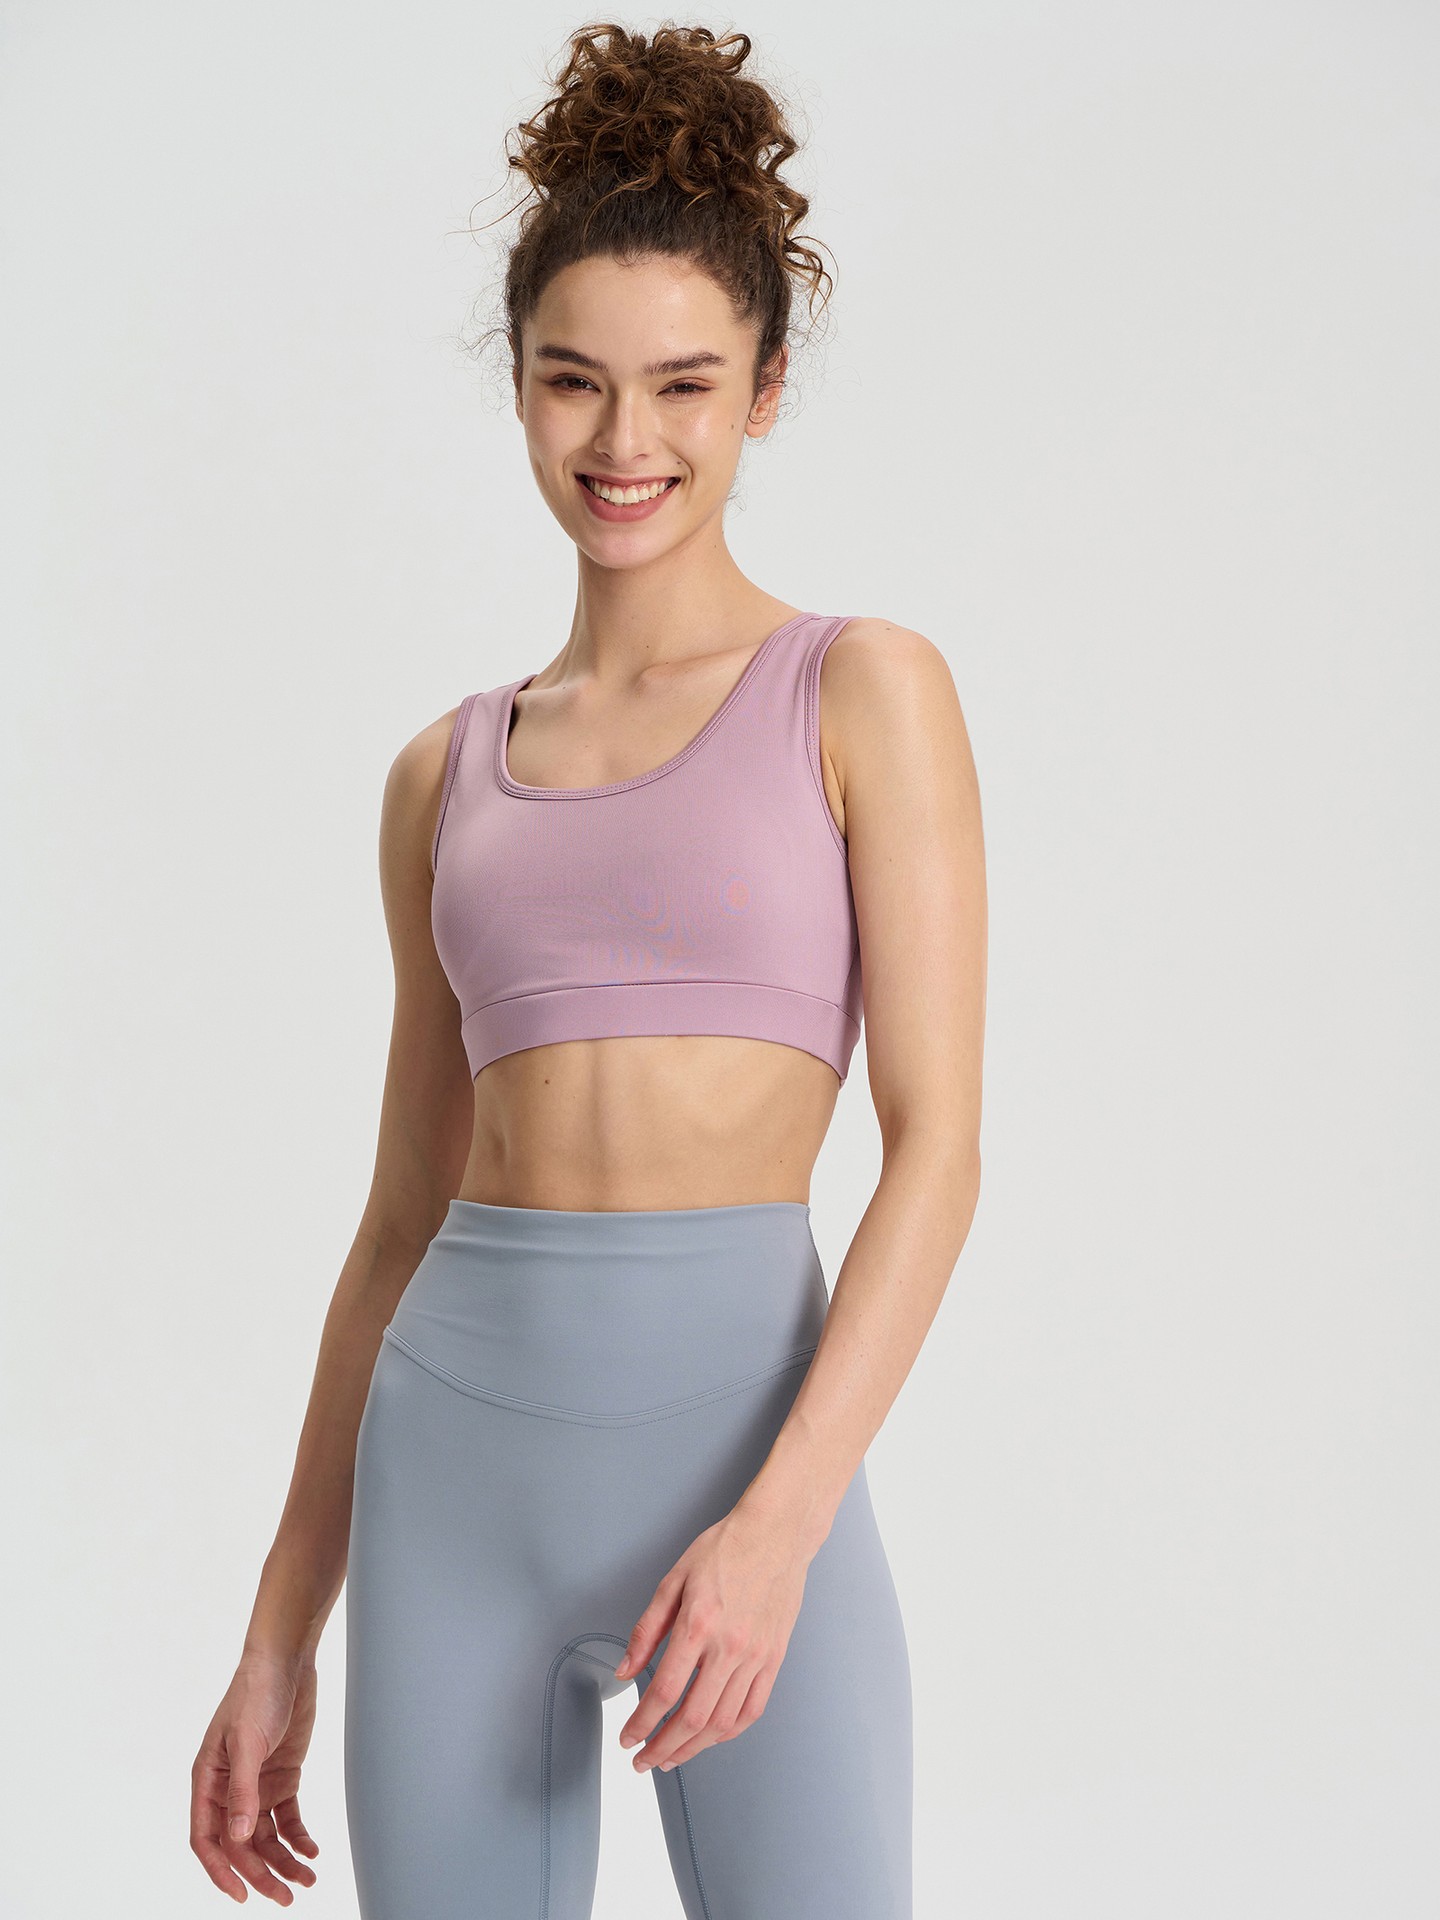 Cut Out Sports Bras